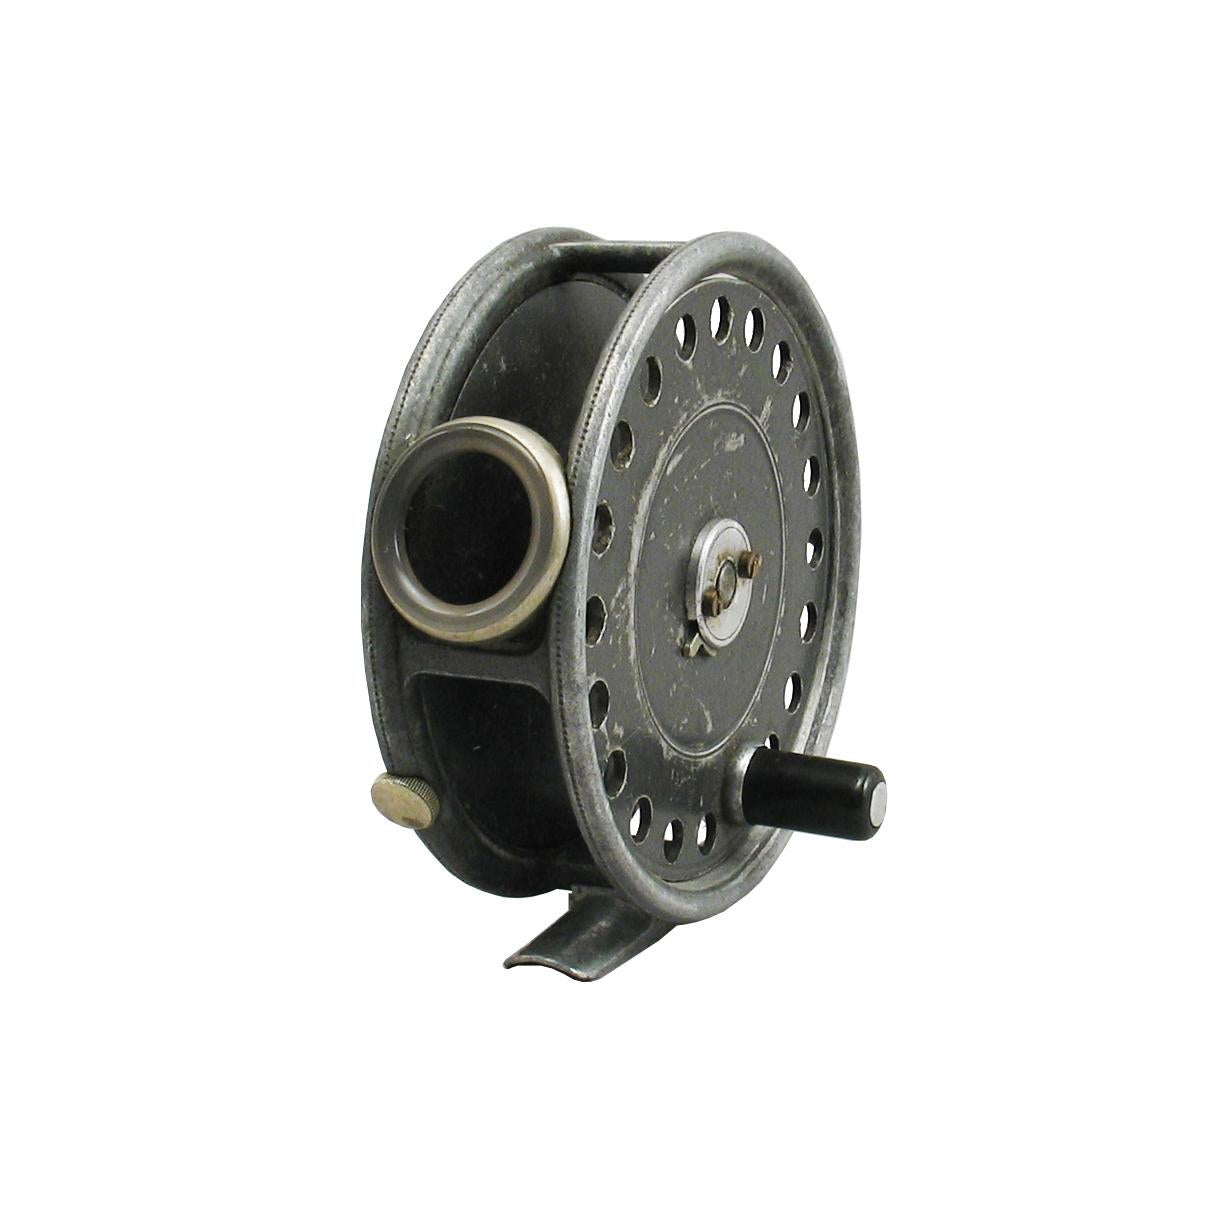 Pryce-Tannatt's personal fishing reel. This is a Hardy St. George alloy trout fly reel, it has a smooth agate line guide, rim tension regulator, brass foot modified two screw drum latch, smooth check, black handle and retains some original grey